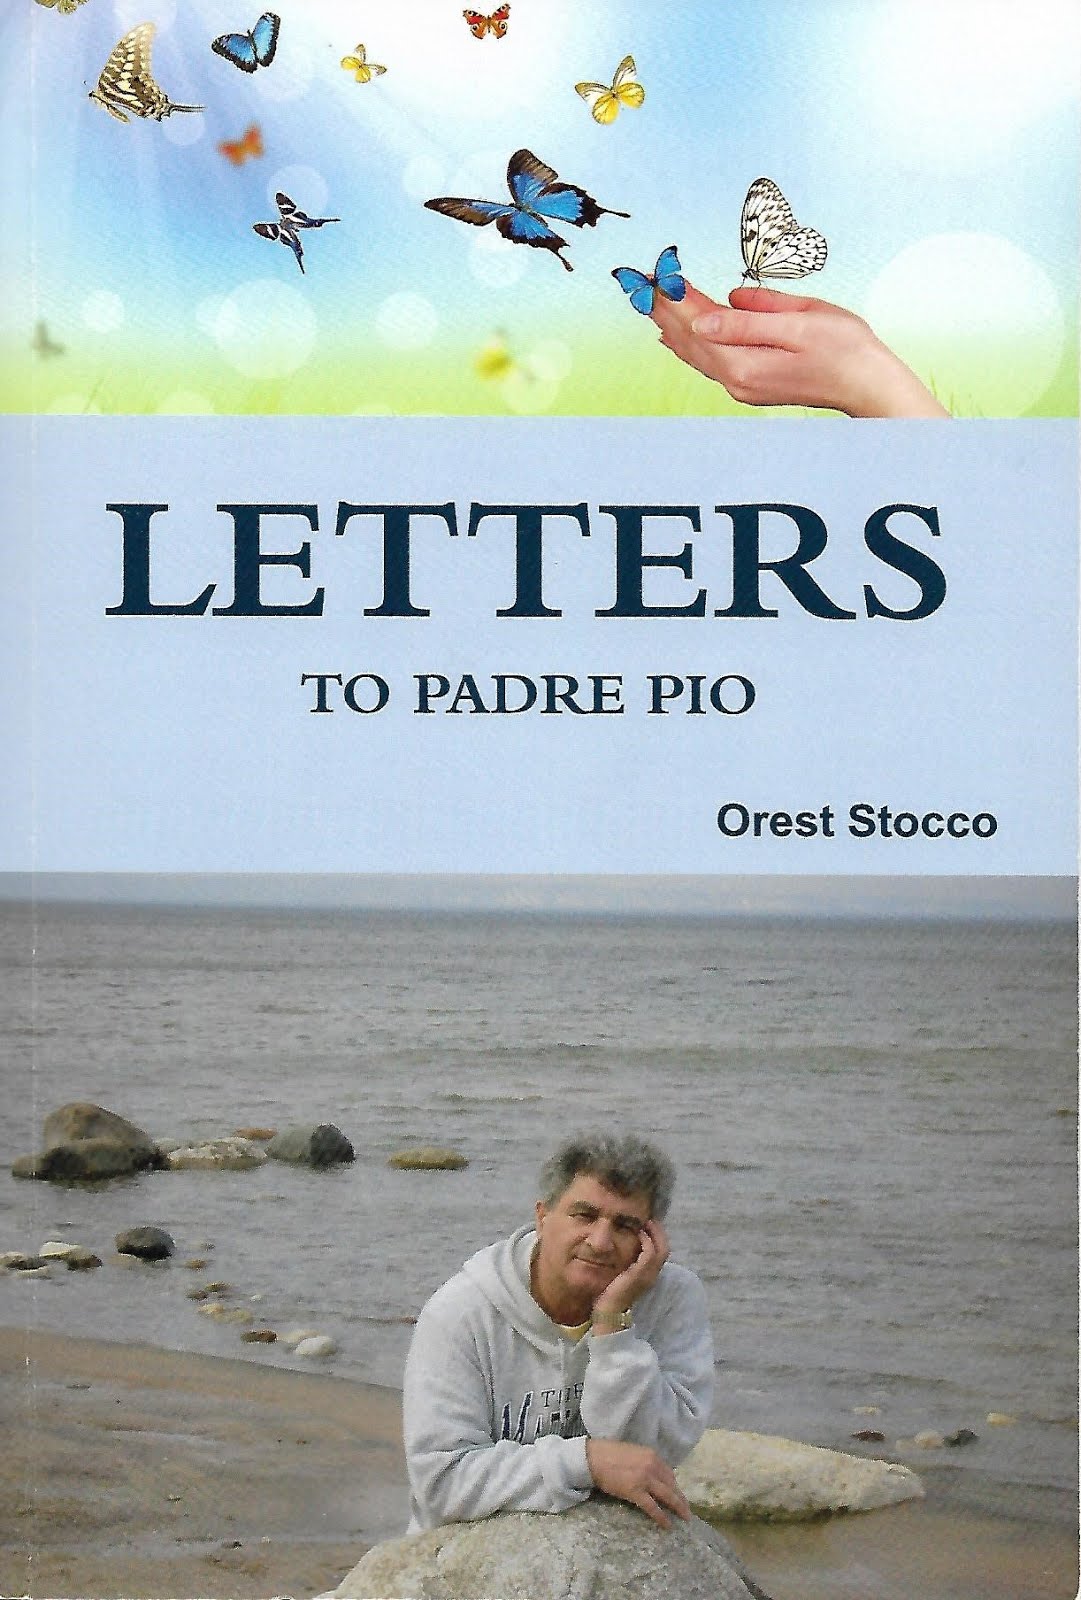 Letters to Padre Pio